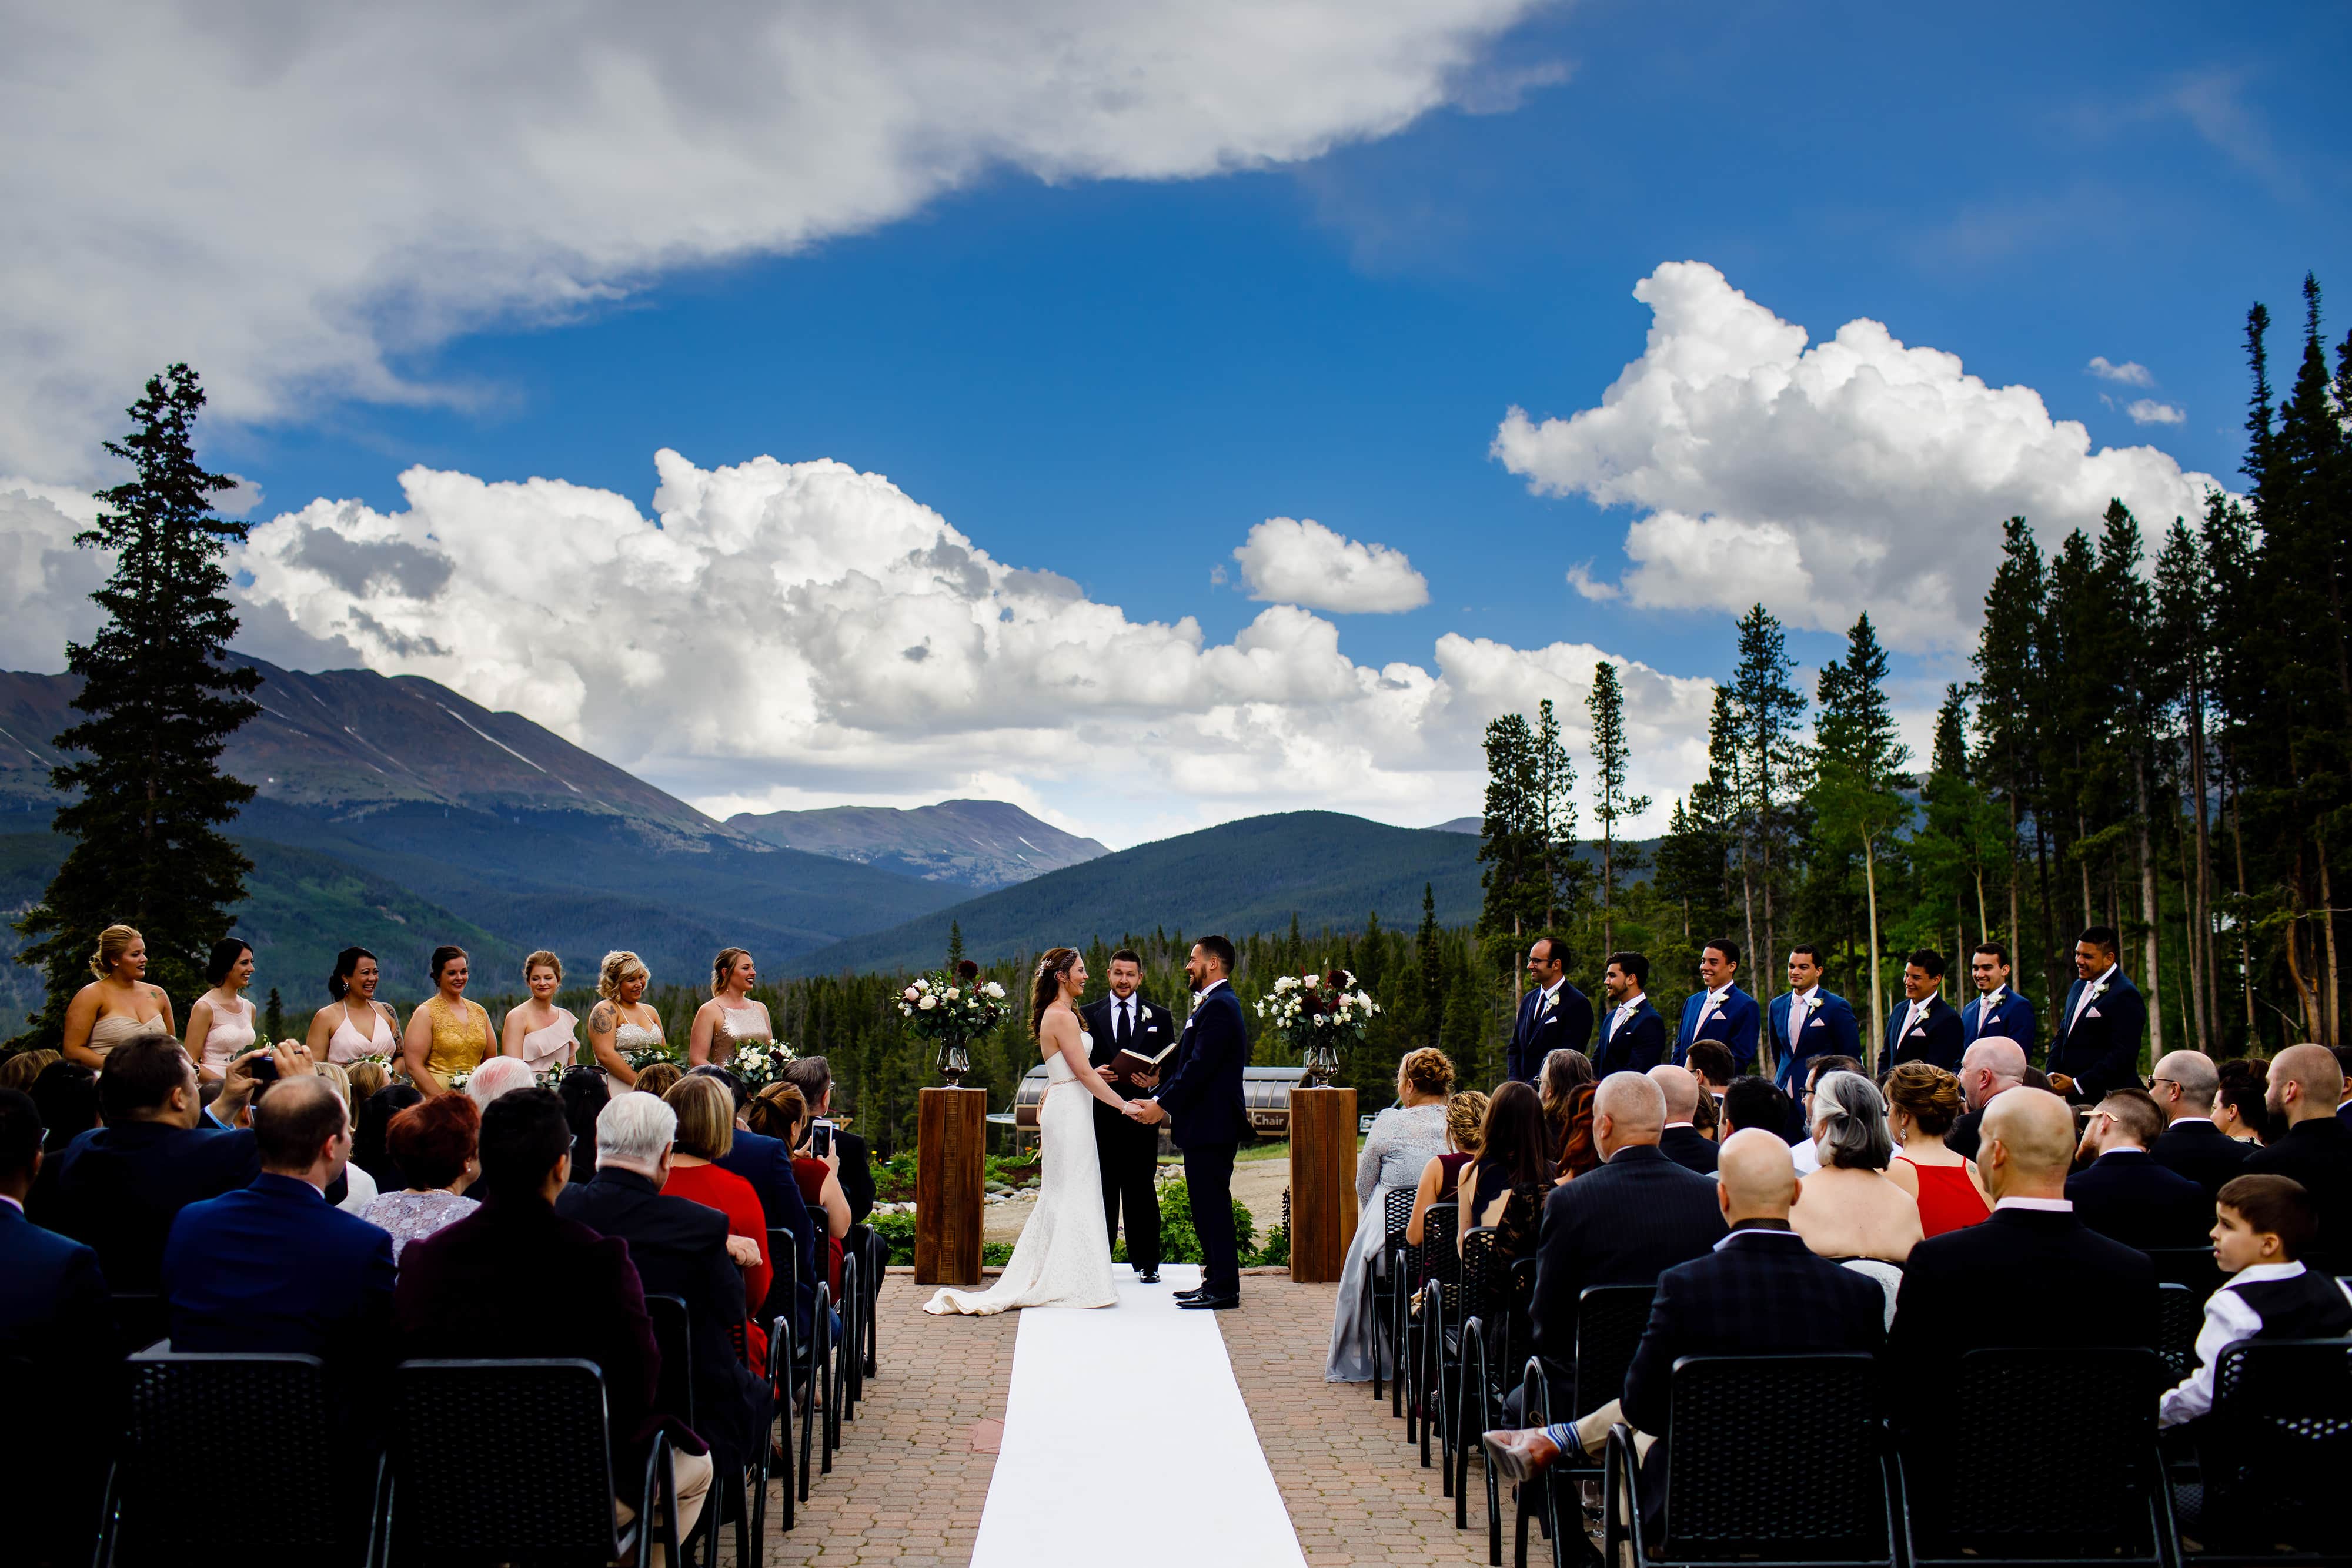 Nick and Sharon hold hands during their TenMile Station wedding ceremony in Breckenridge